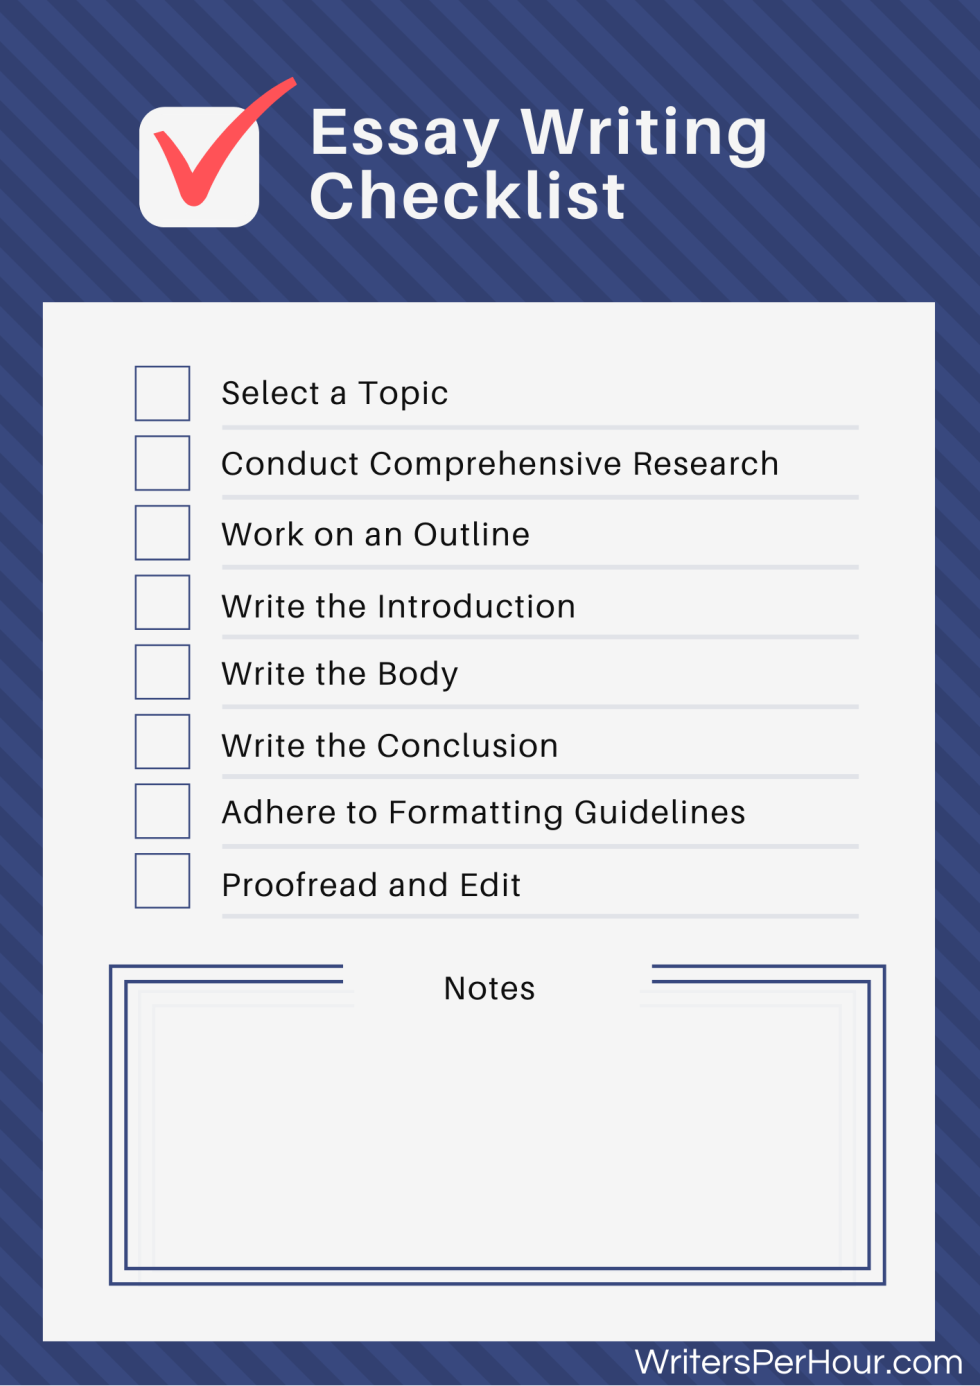 essay-writing-checklist-sample.png